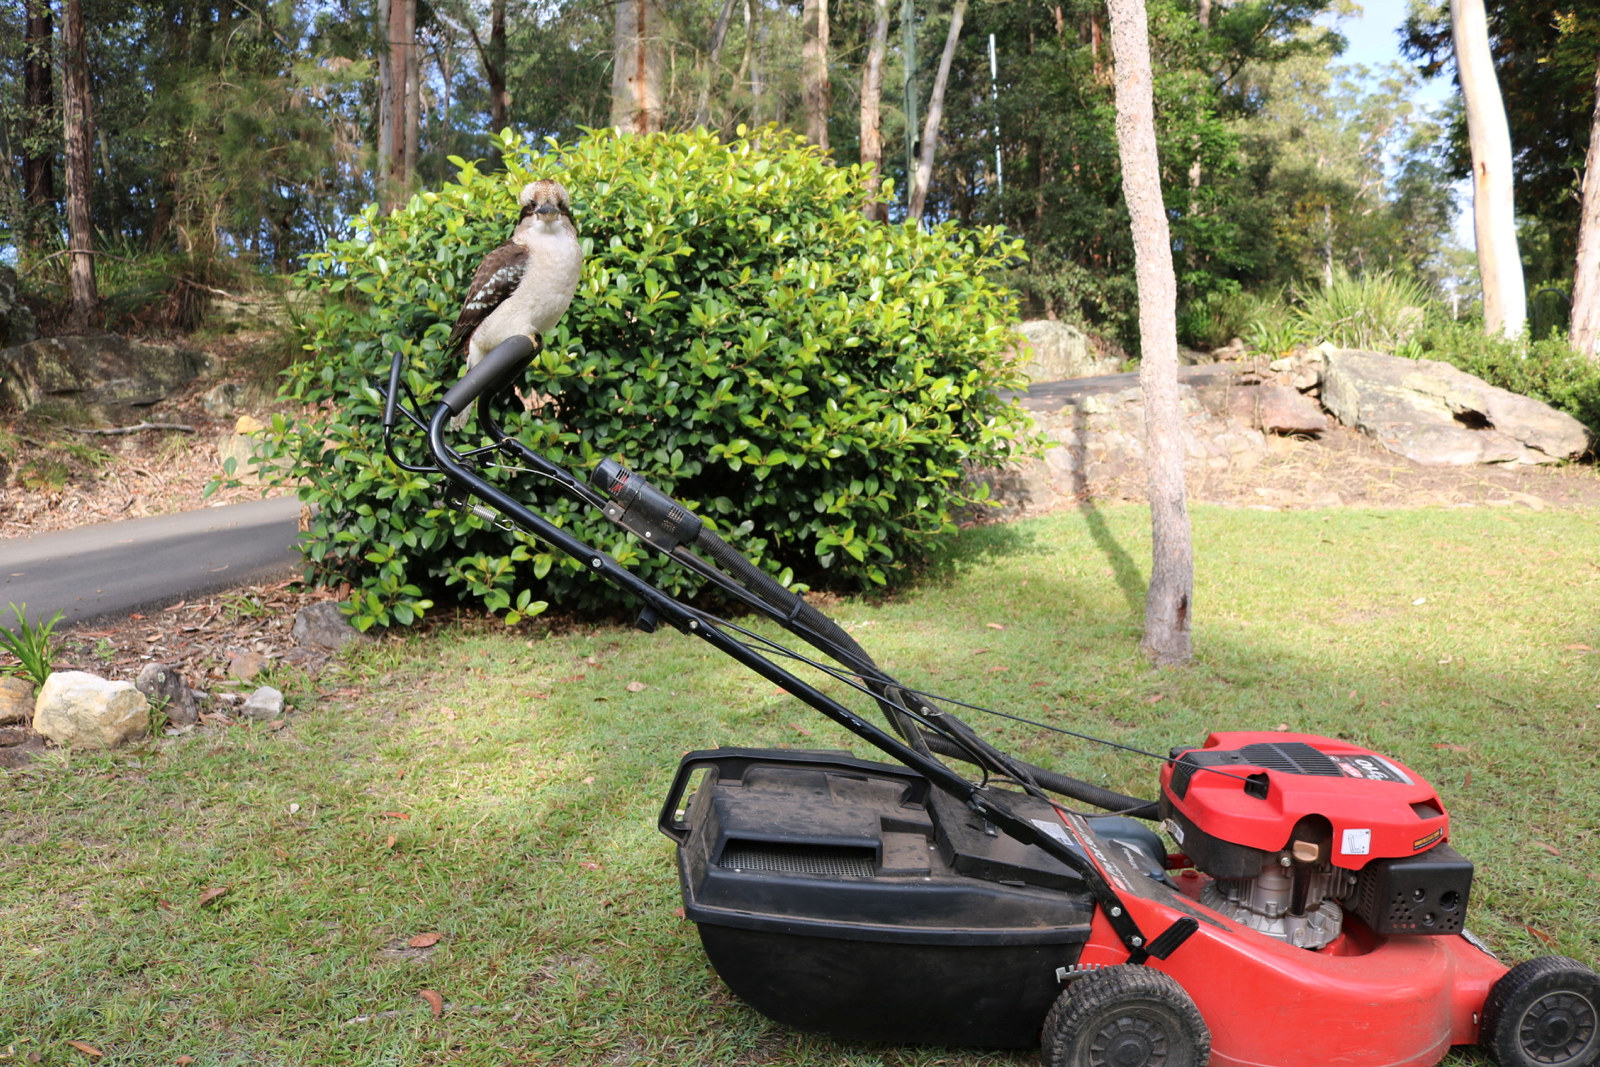 A Kookaburra sits on the handle of the lawn mower at rose seidler house